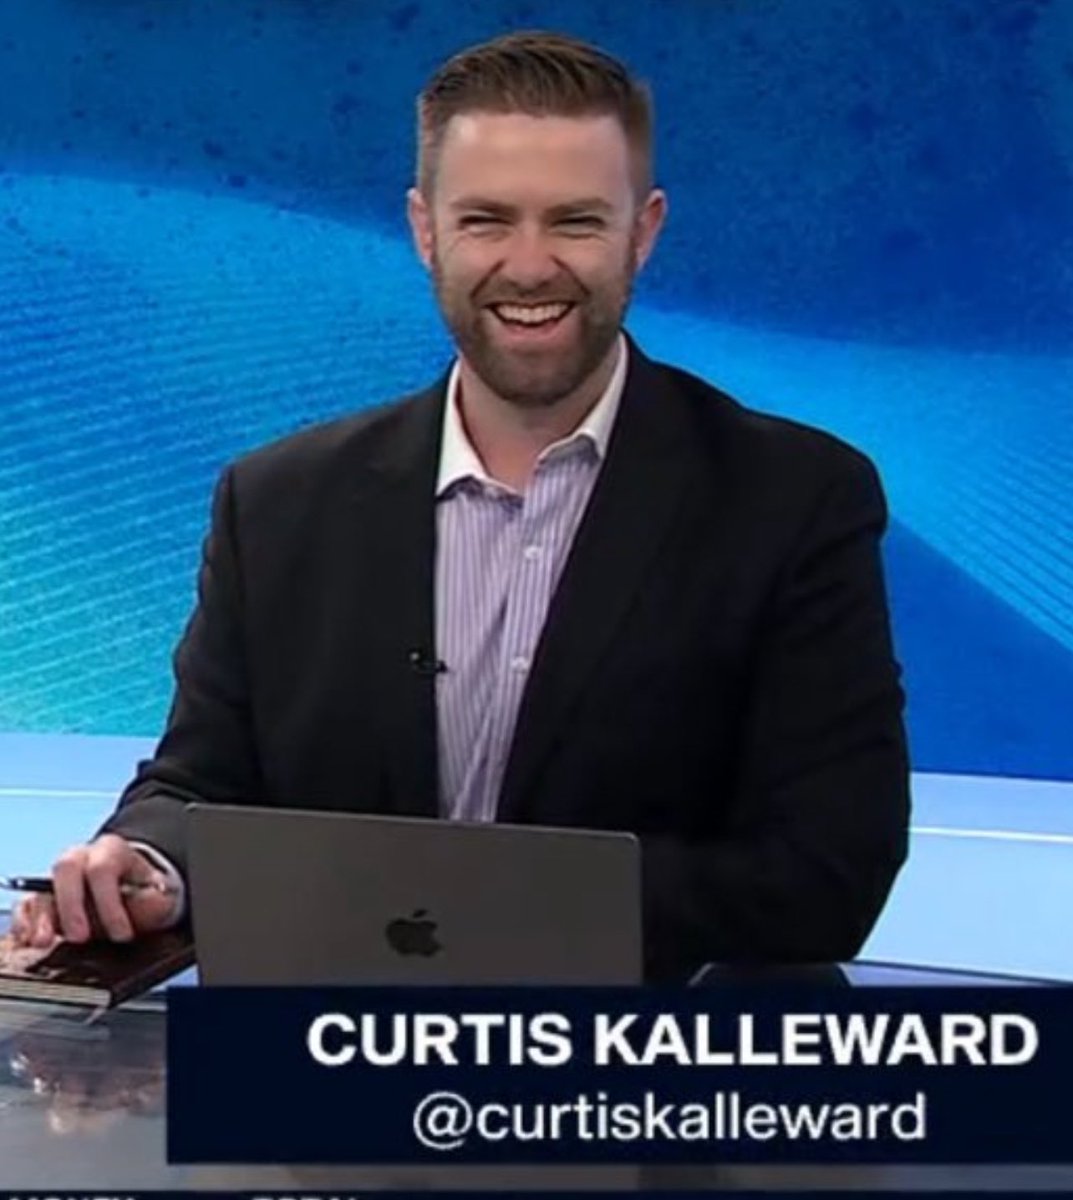 Hey!  I know that guy!!! Congrats @curtiskalleward!